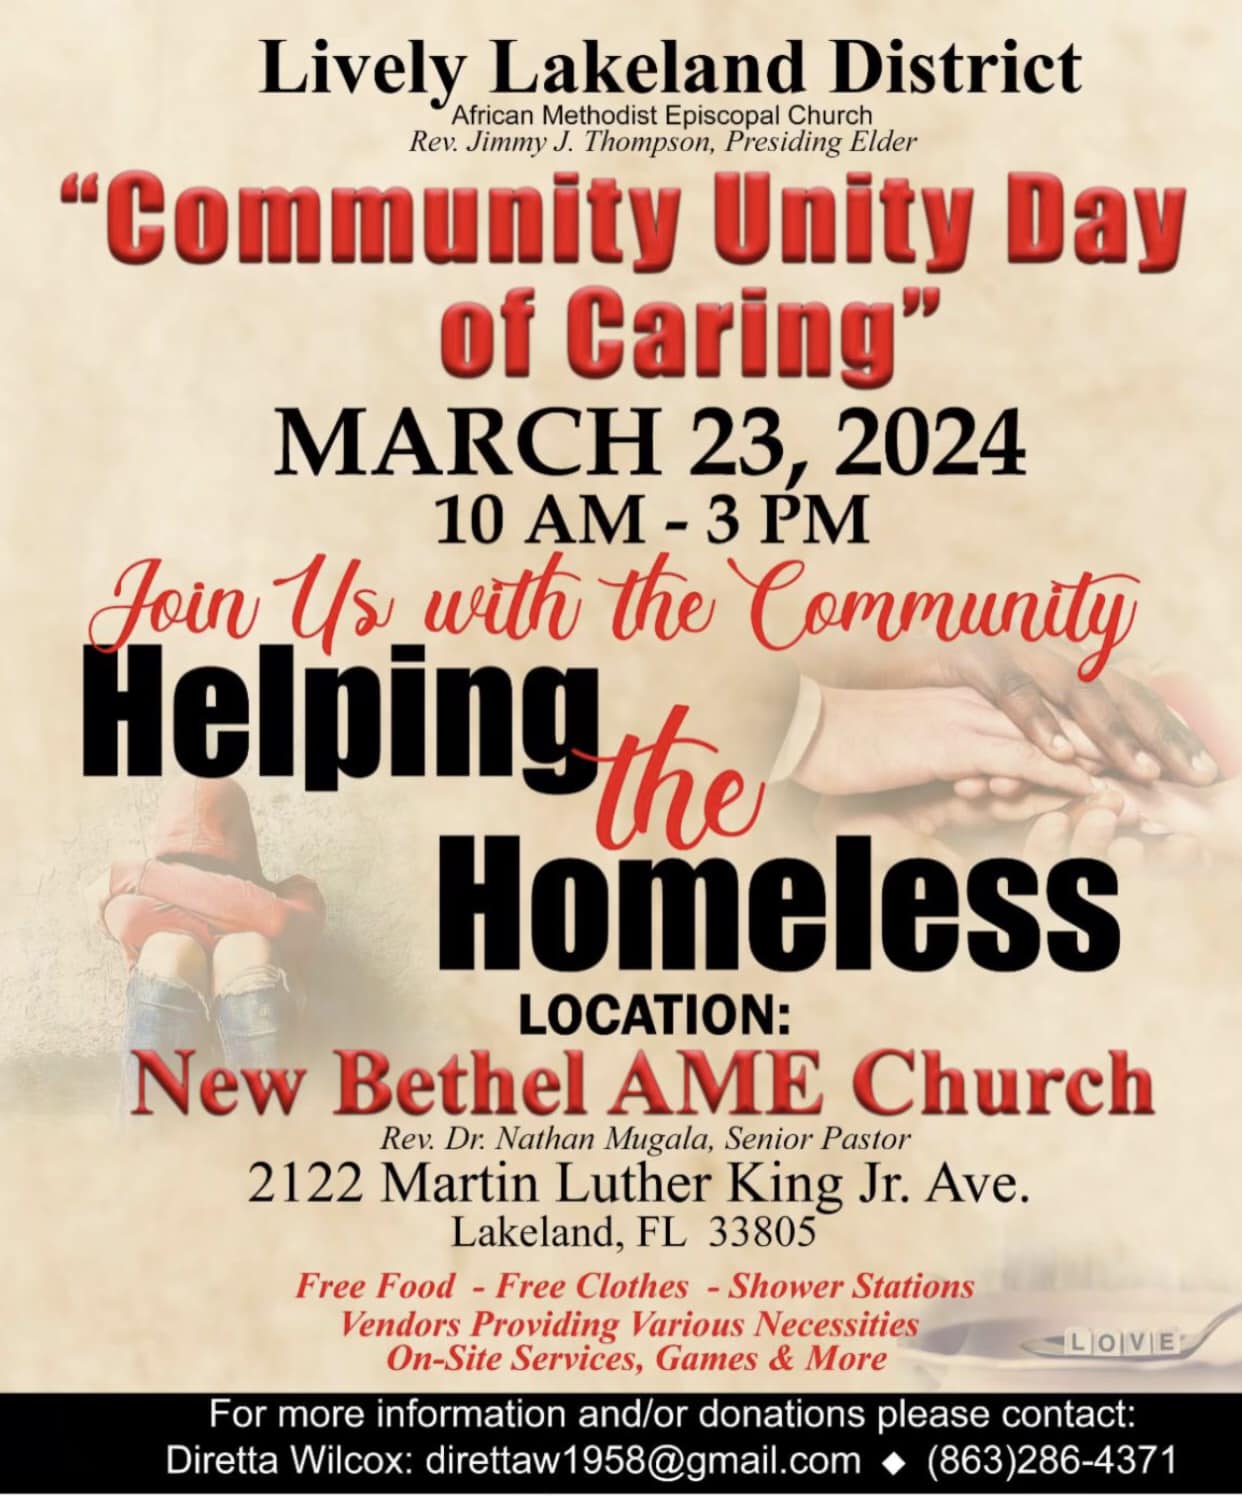 A poster for the "Community Unity Day of Caring." It is a tan poster with the following words: "Lively Lakeland District. African Methodist Episcopal Church. Rev. Jimmy J. Thompson, Presiding Elder, Community Unity Day of Caring, March 23, 2024, 10 AM- 3 PM, Join us with the community helping the homeless, location: New Bethel AME Church, Rev. Dr. Nathan Mugala. Senior Pastor, 2122 Martin Luther King Jr Ave. Lakeland FL 33805, Free Food, Free Clothes, Shower Stations, Vendors Providing Various Necessities On-Site Services, Games & More, for more information and/or donations please contact: Diretta Wilcox: direttaw1958@gmail.com, (863) 286-4371." In the background there are hands, someone curled up sitting down, and a spoon with the words love in it.